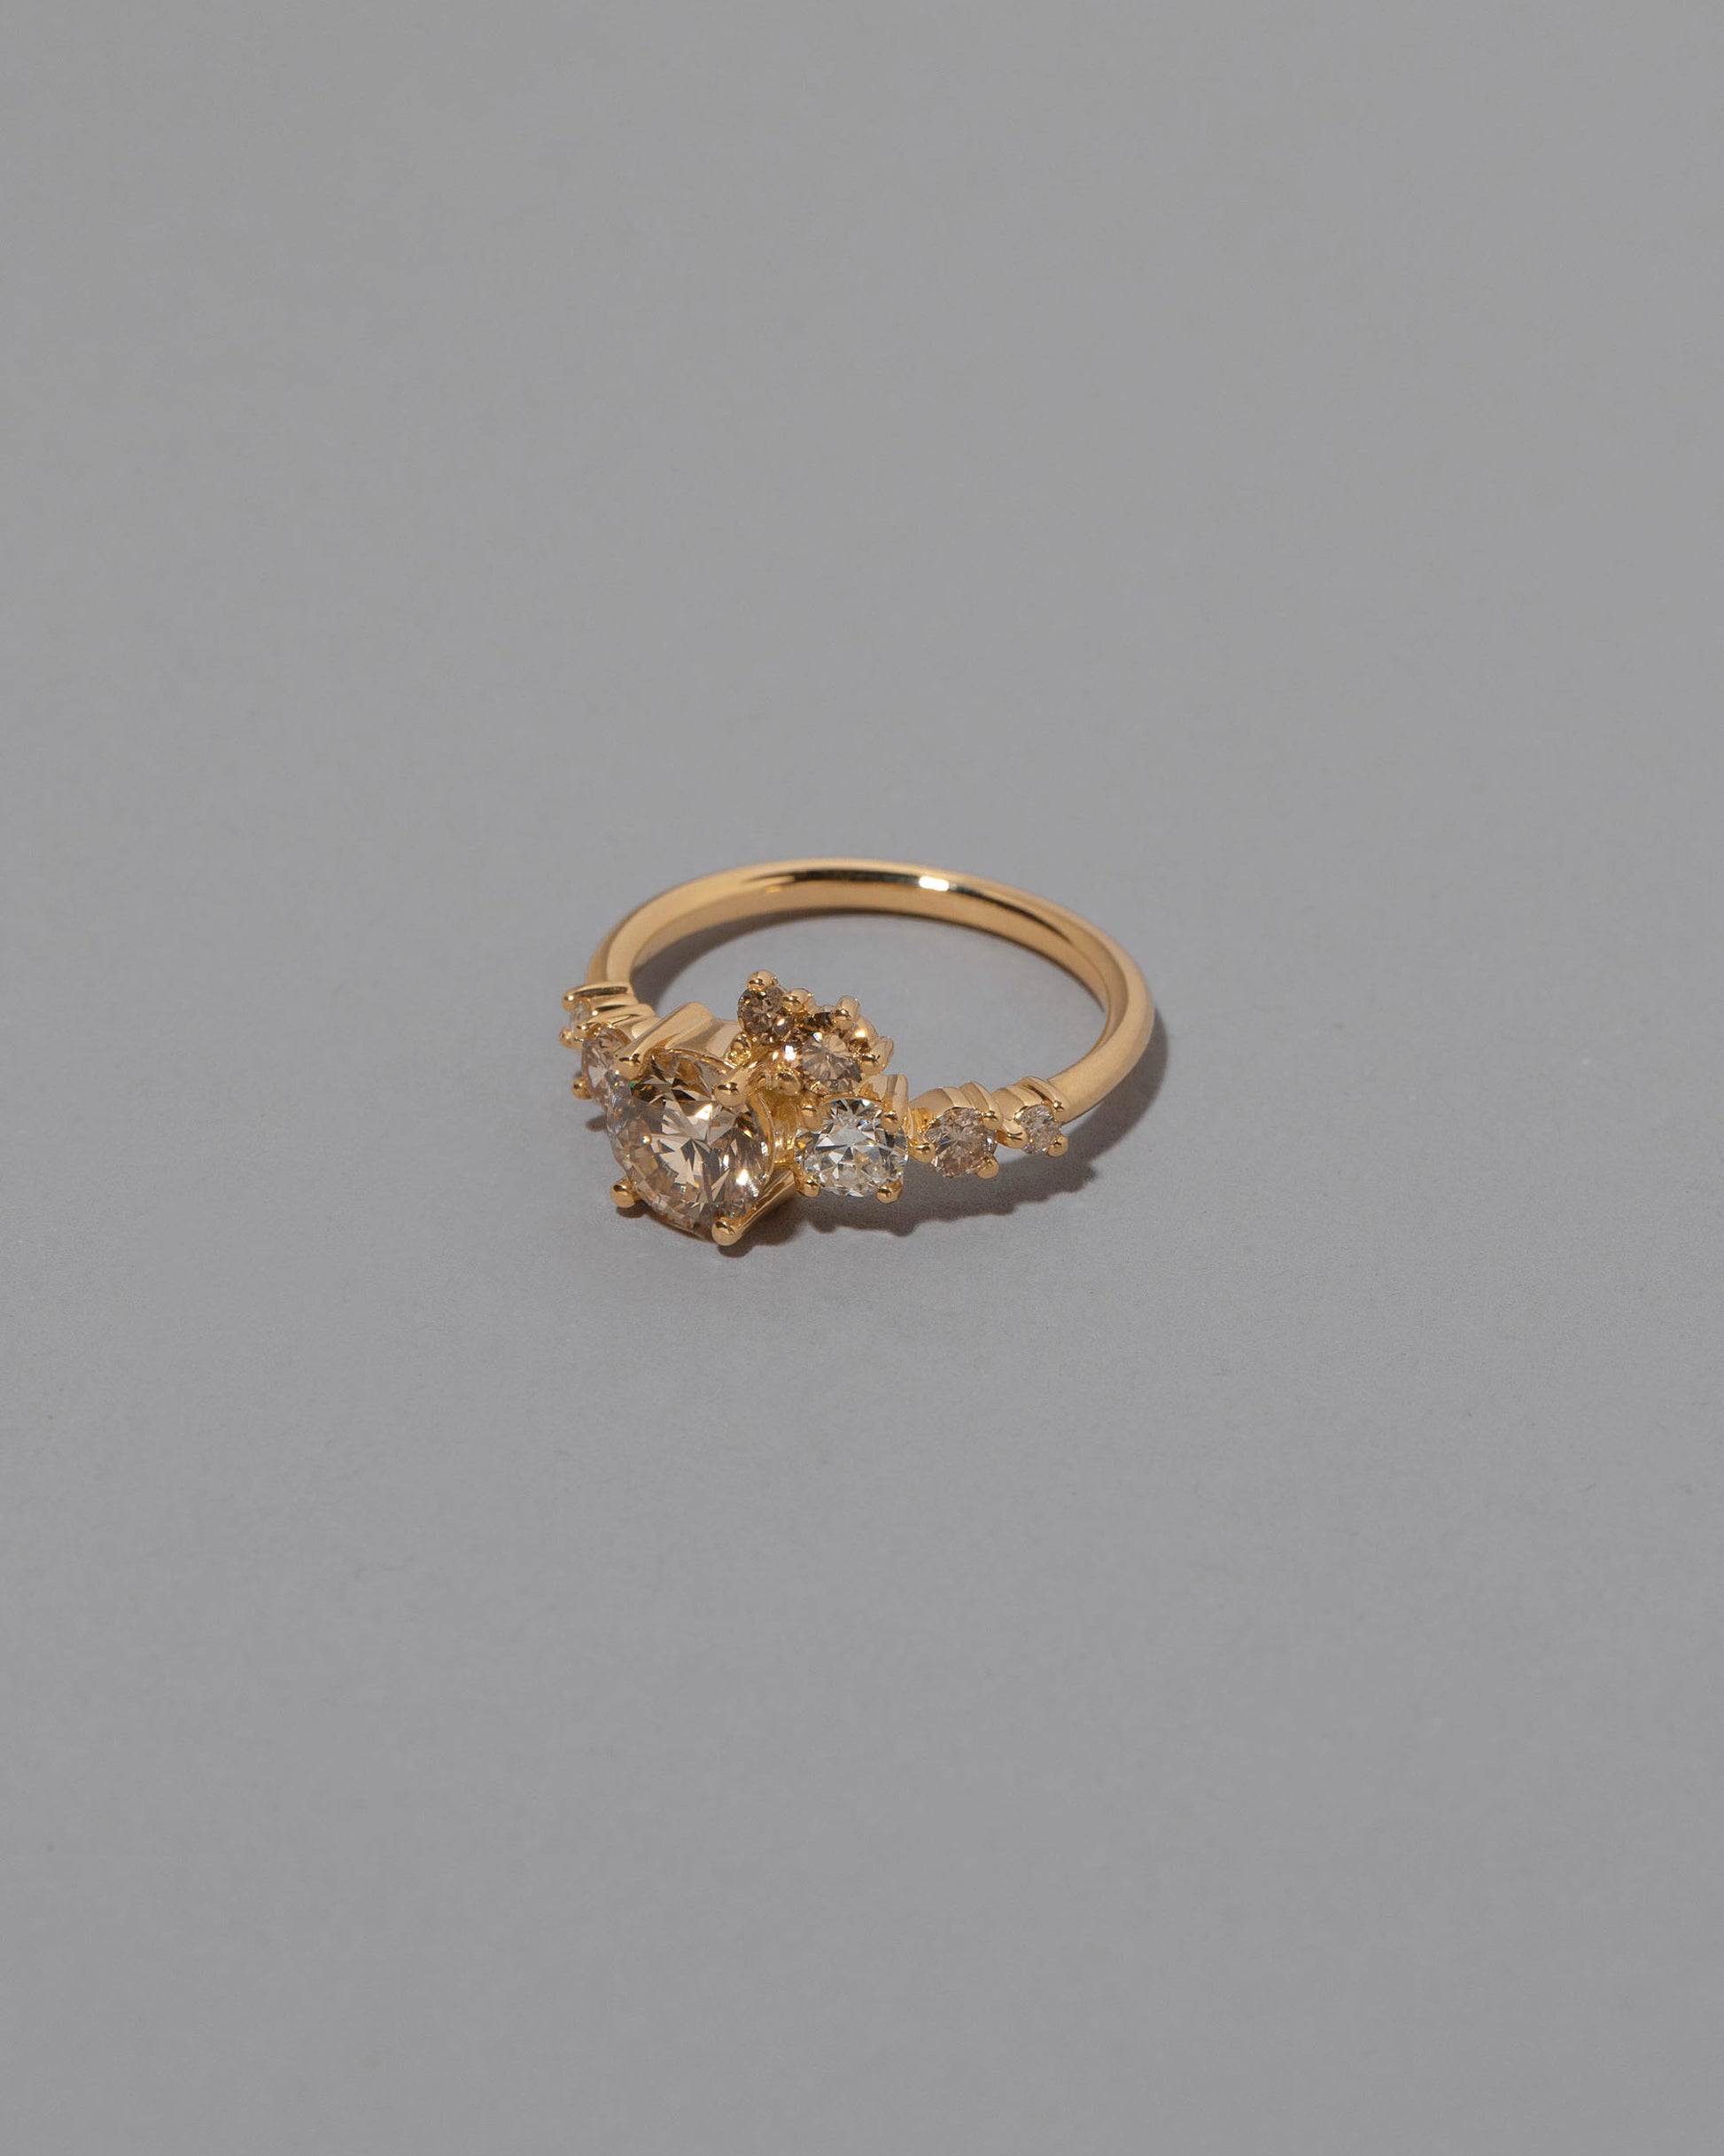 View from the side of the Champagne Diamond Luna Ring on grey color background.